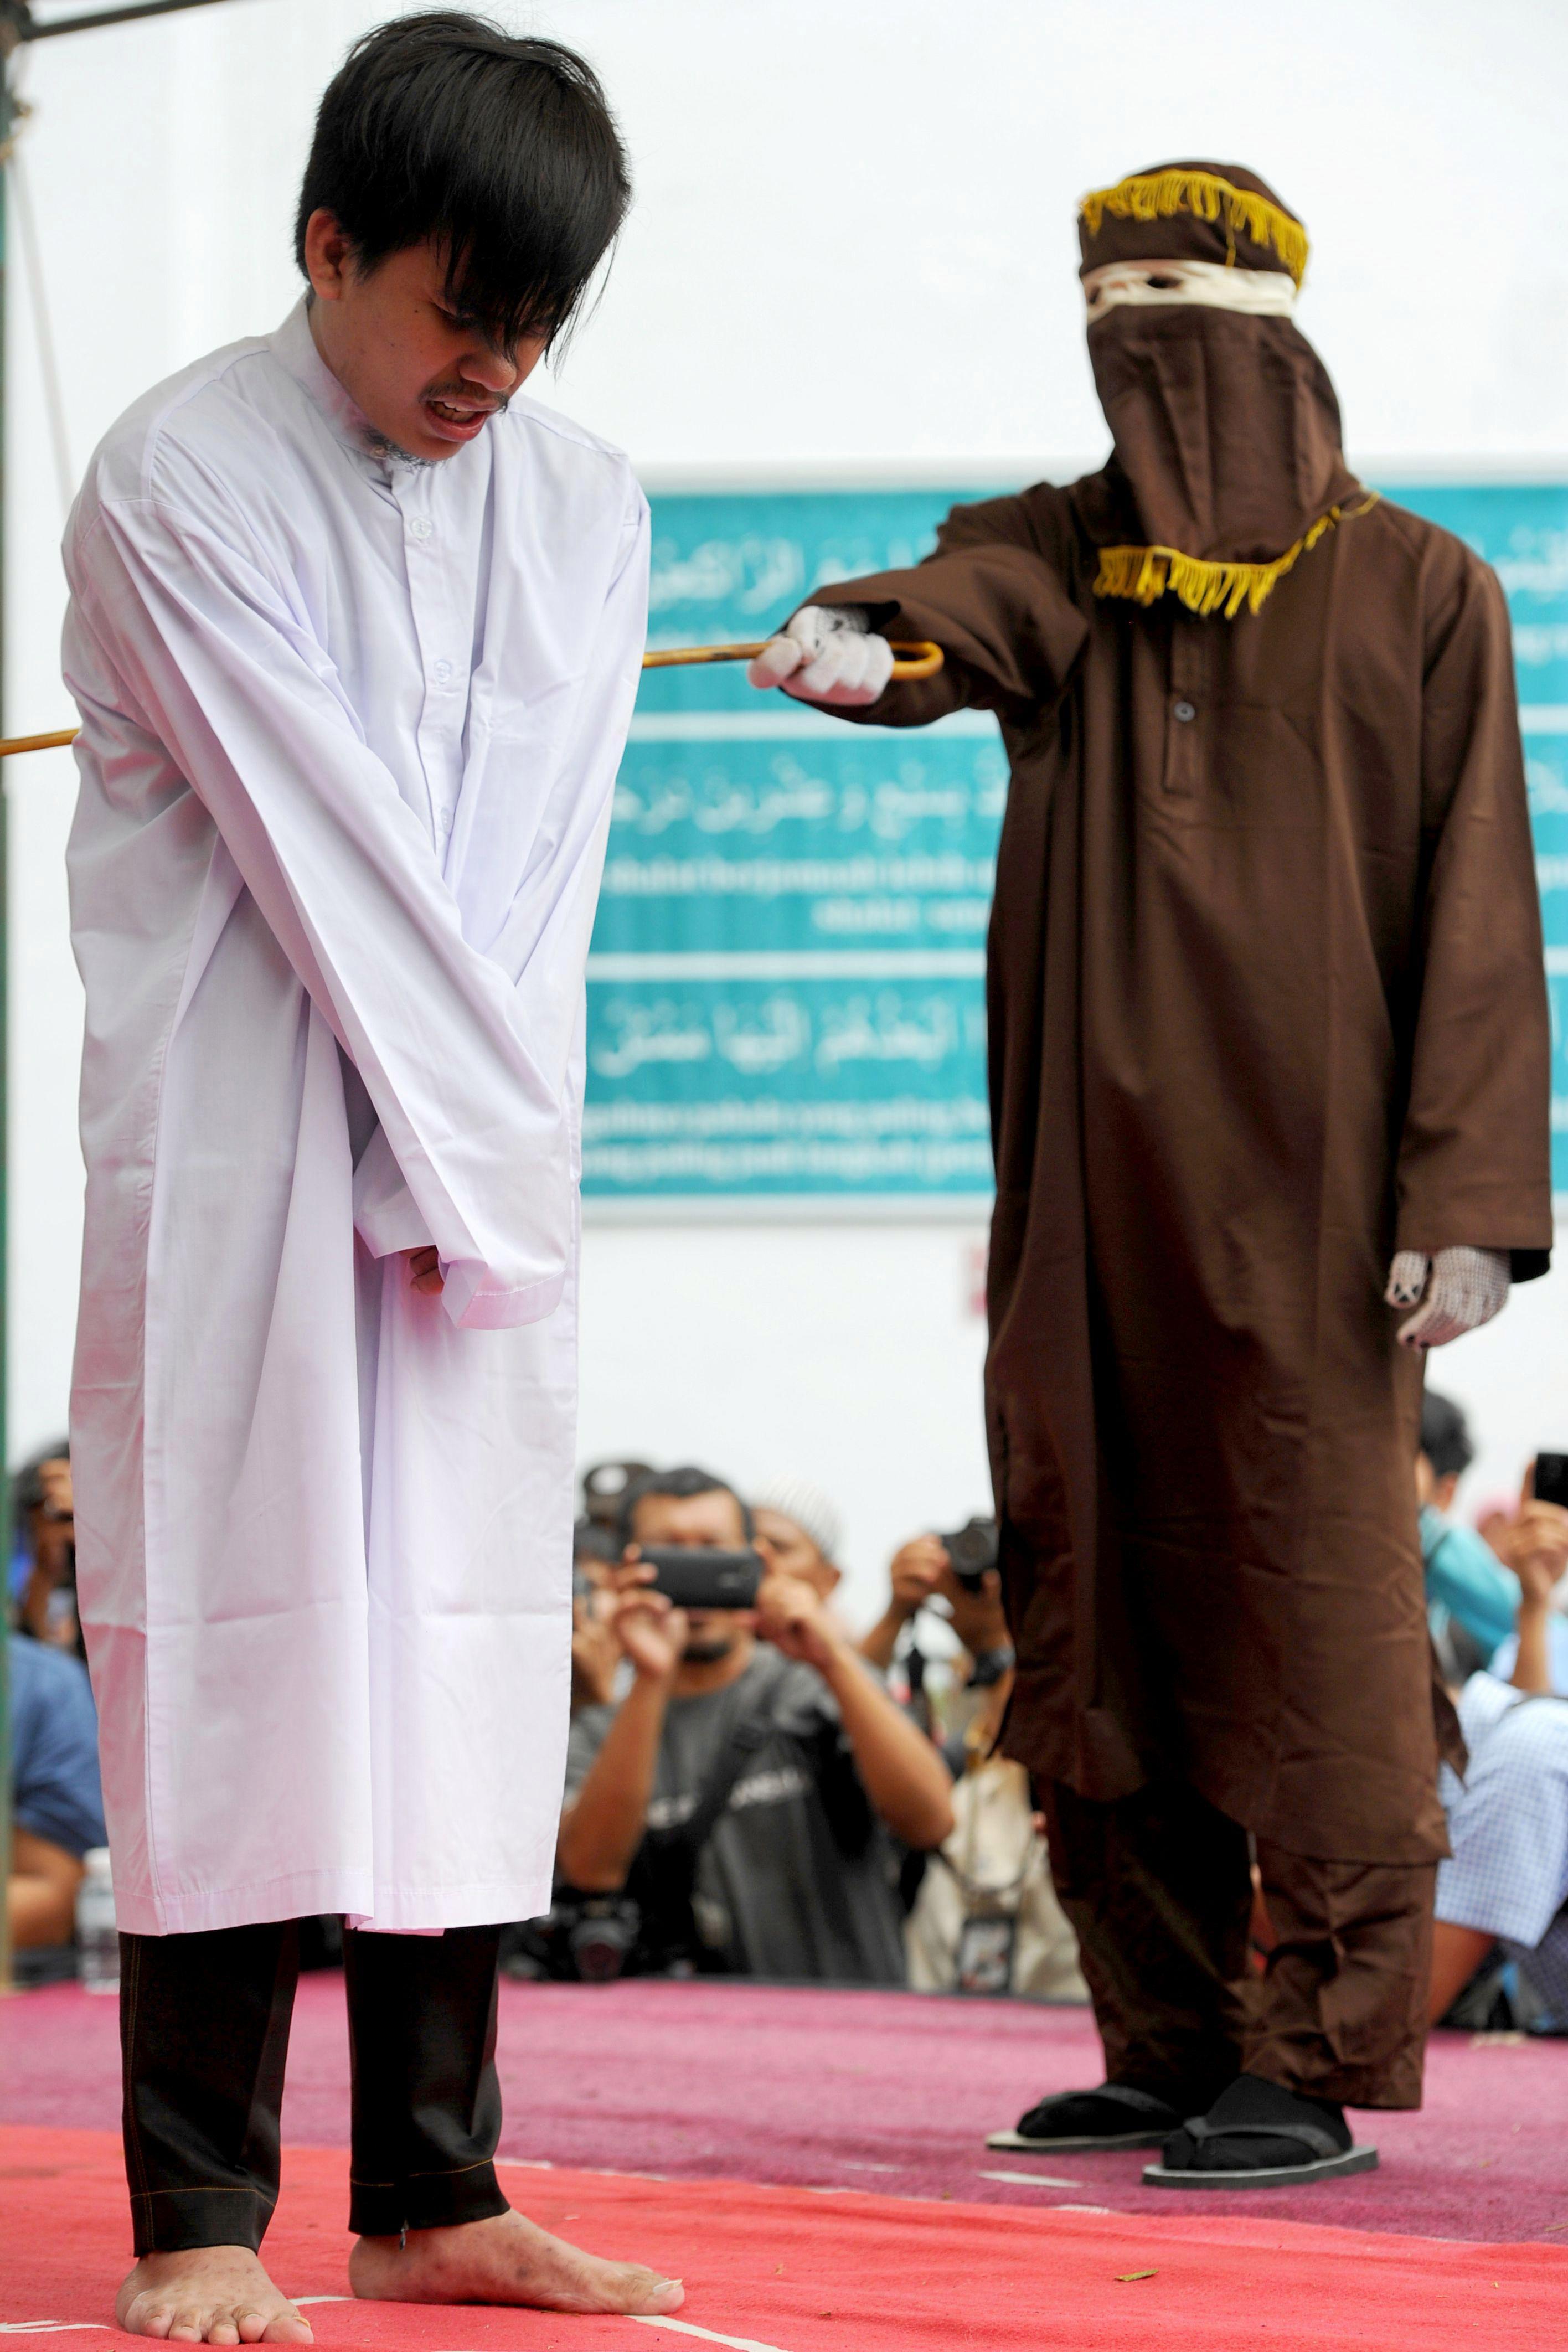 They were caned by sinister-looking masked men employed to uphold Sharia law